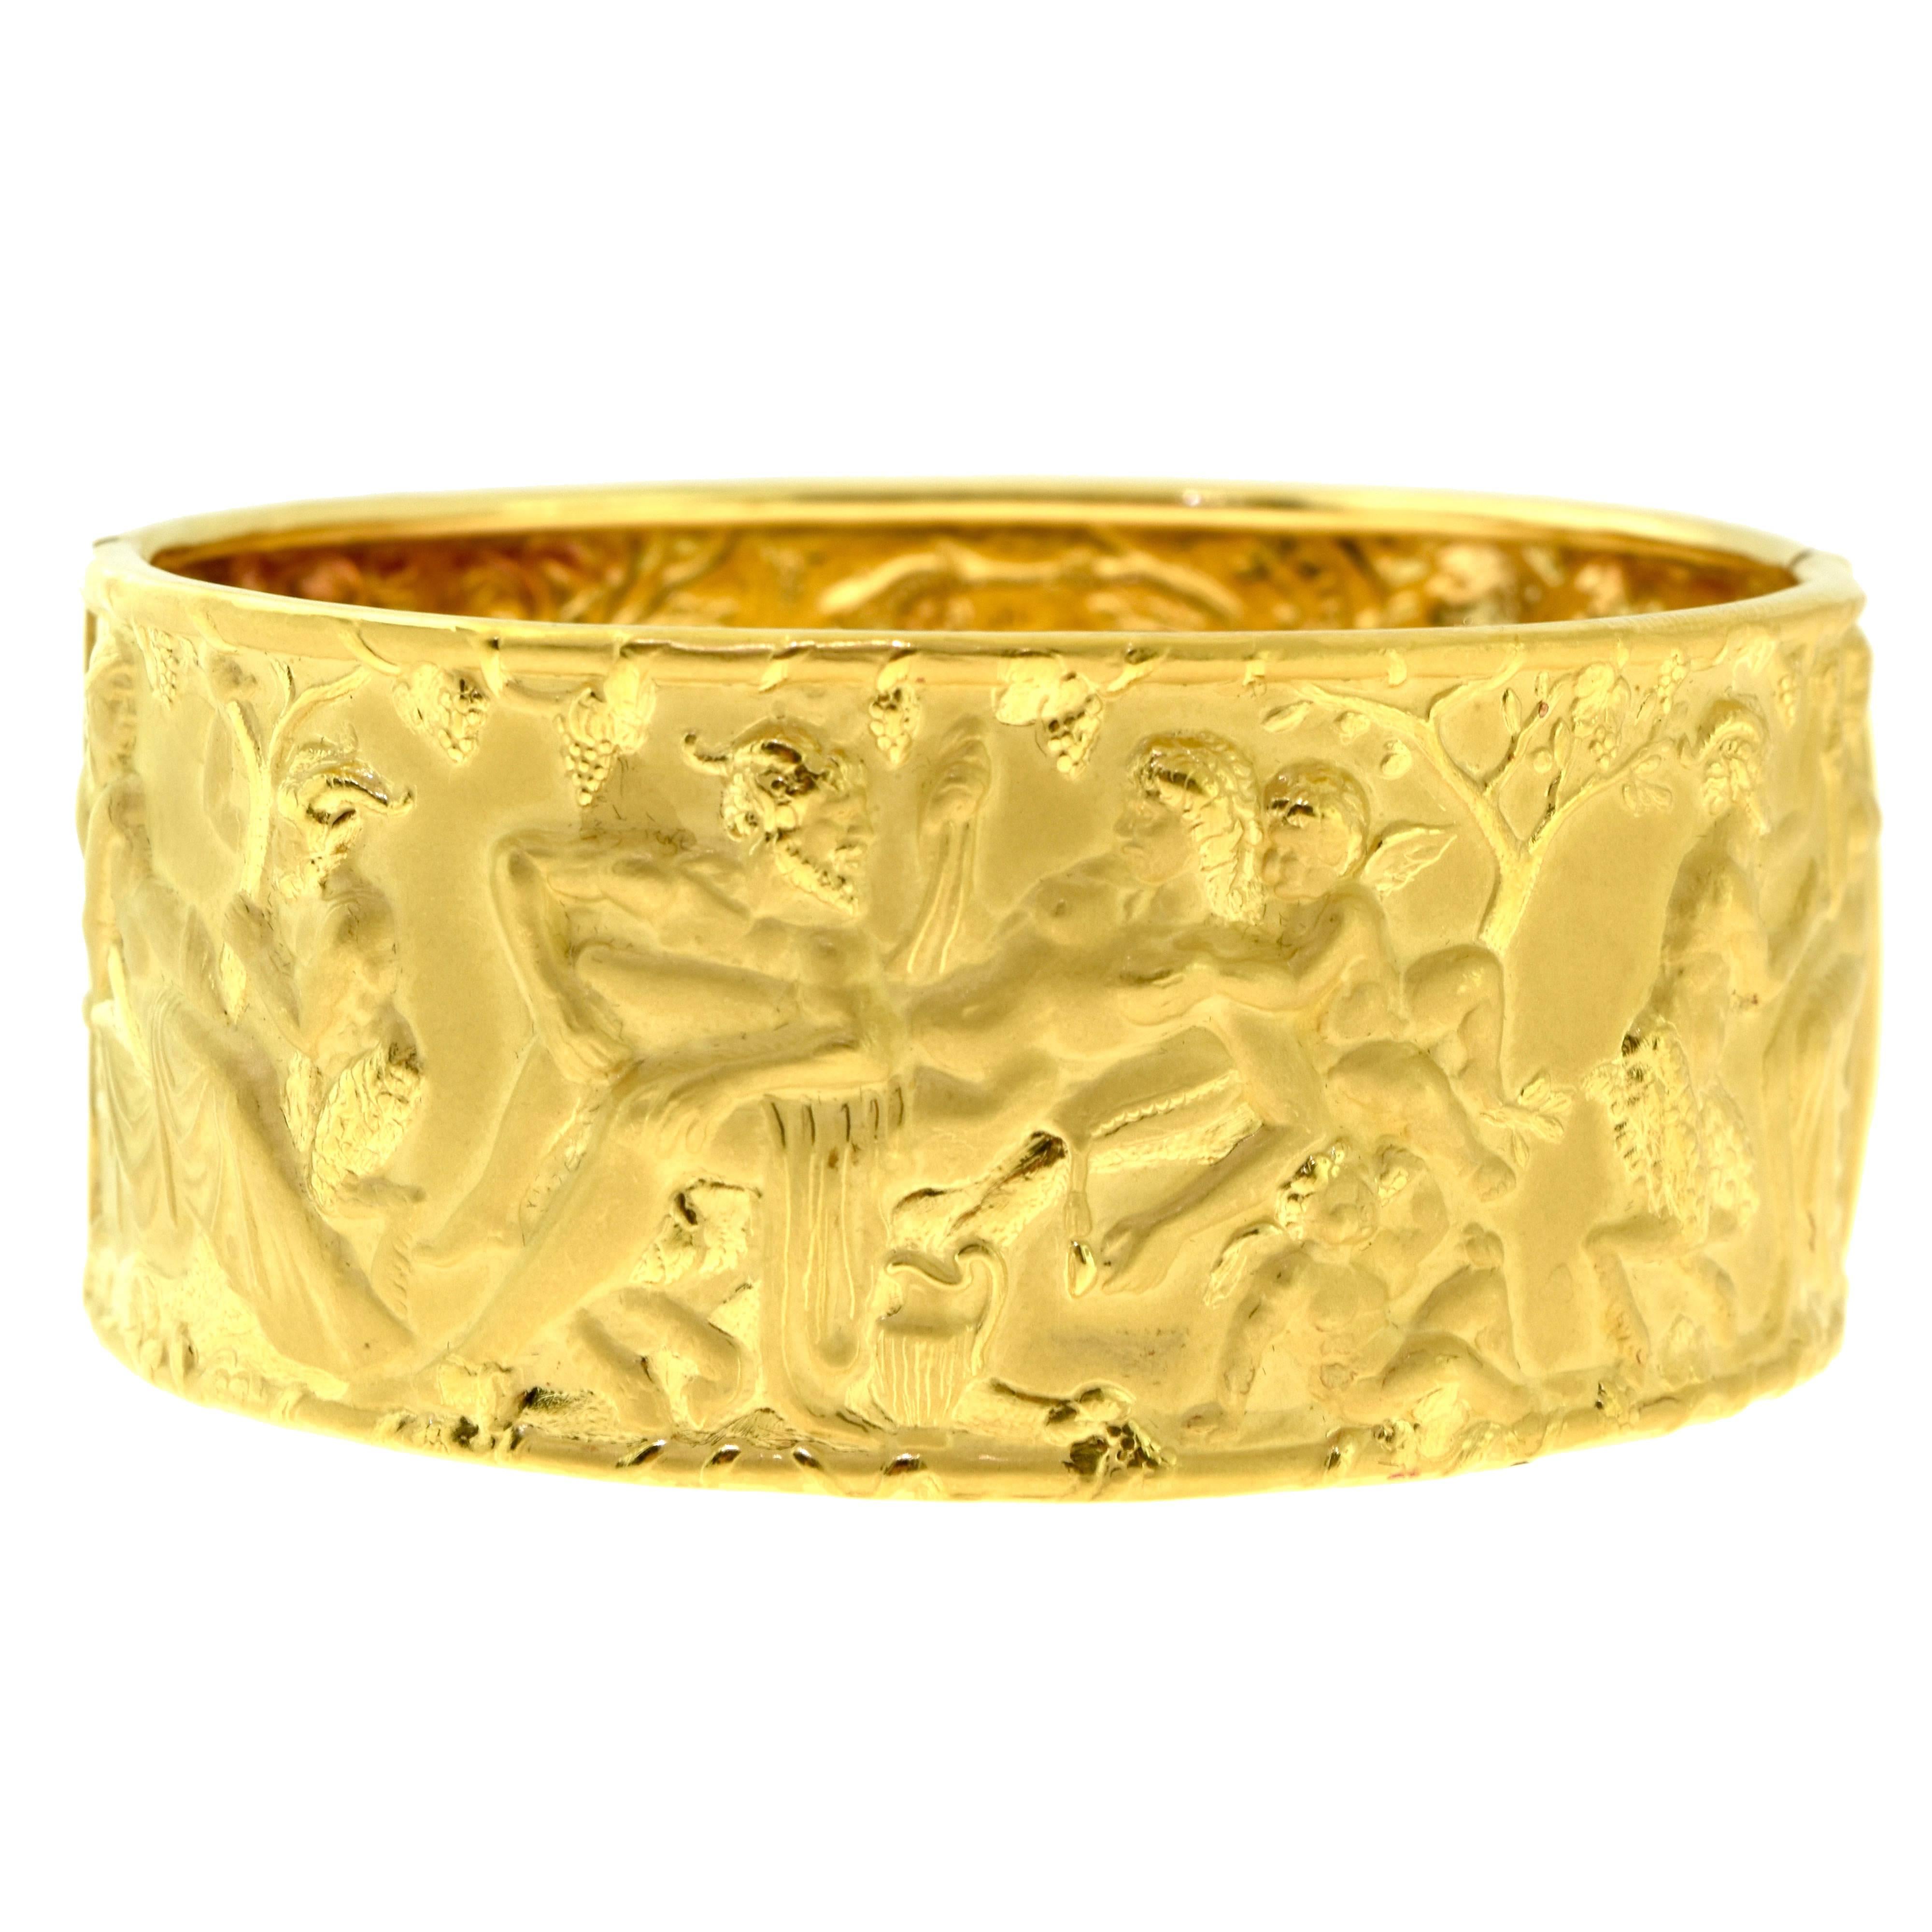 Inspired by Shakespeare's a Midsummer's Night Dream, this erotically infused bangle is absolutely stunning. Set in solid 18k yellow gold, the bangle weighs a total of 52.3 grams and rests beautifully upon your wrist.